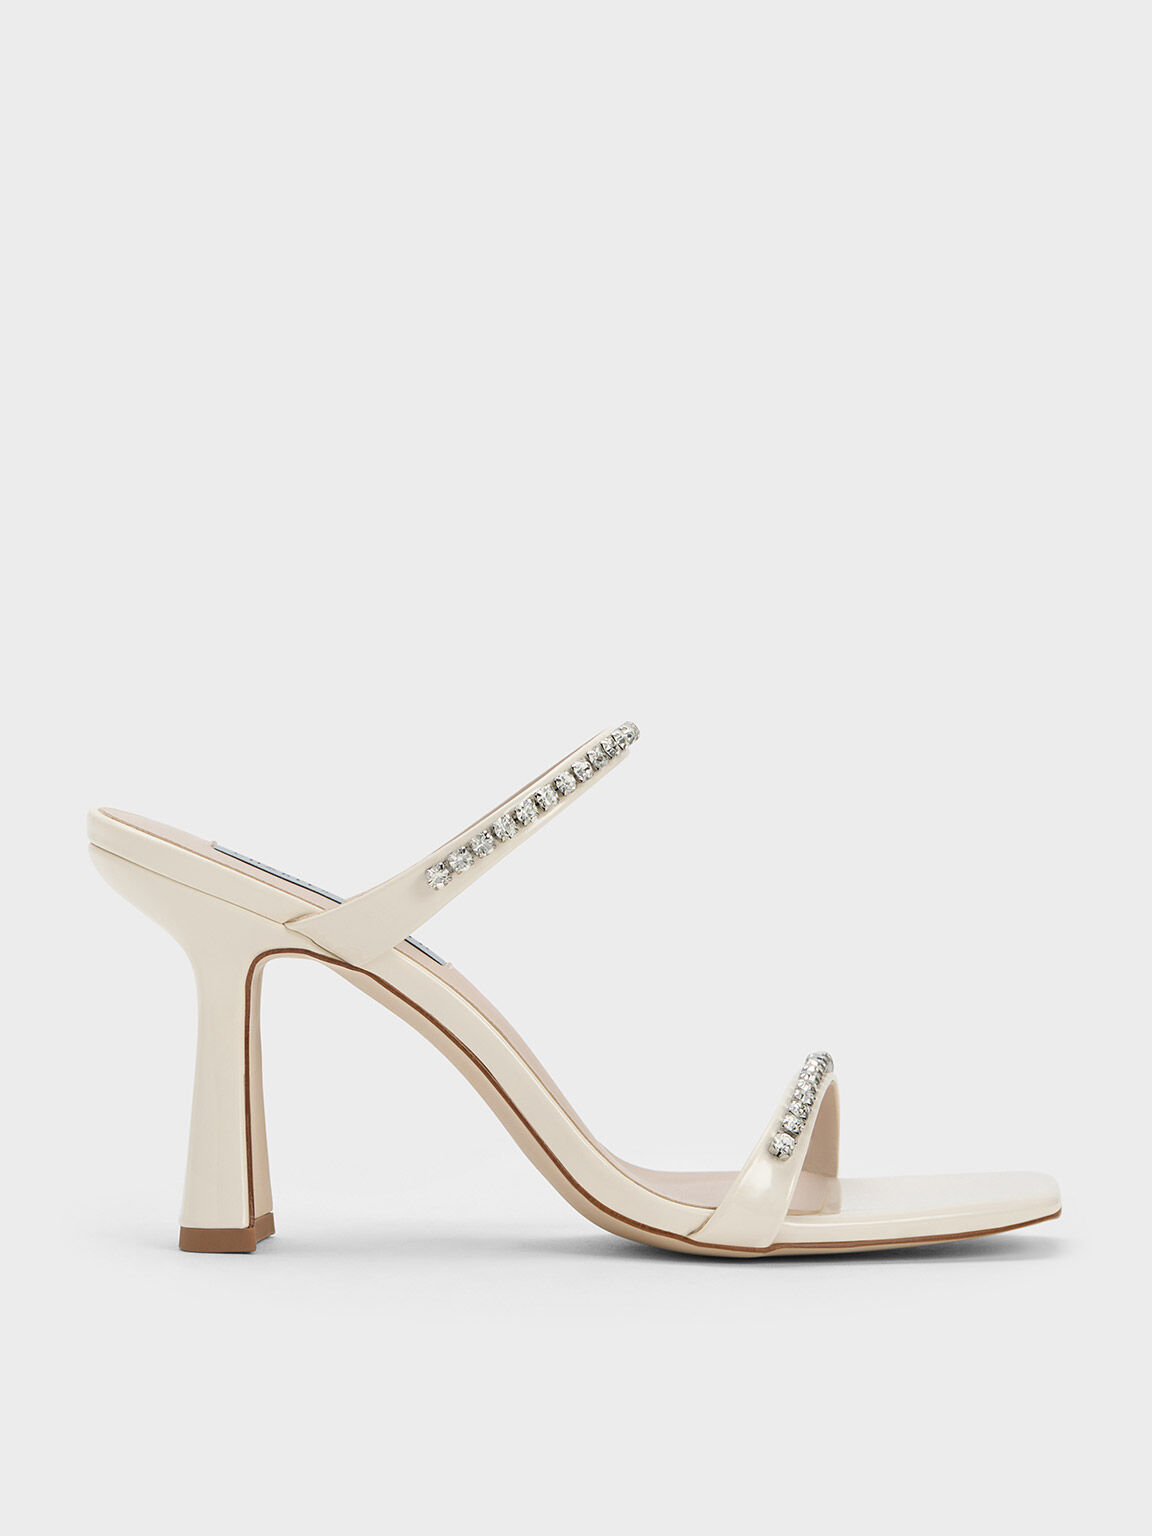 Women's Shoes | Shop Exclusive Styles | CHARLES & KEITH US